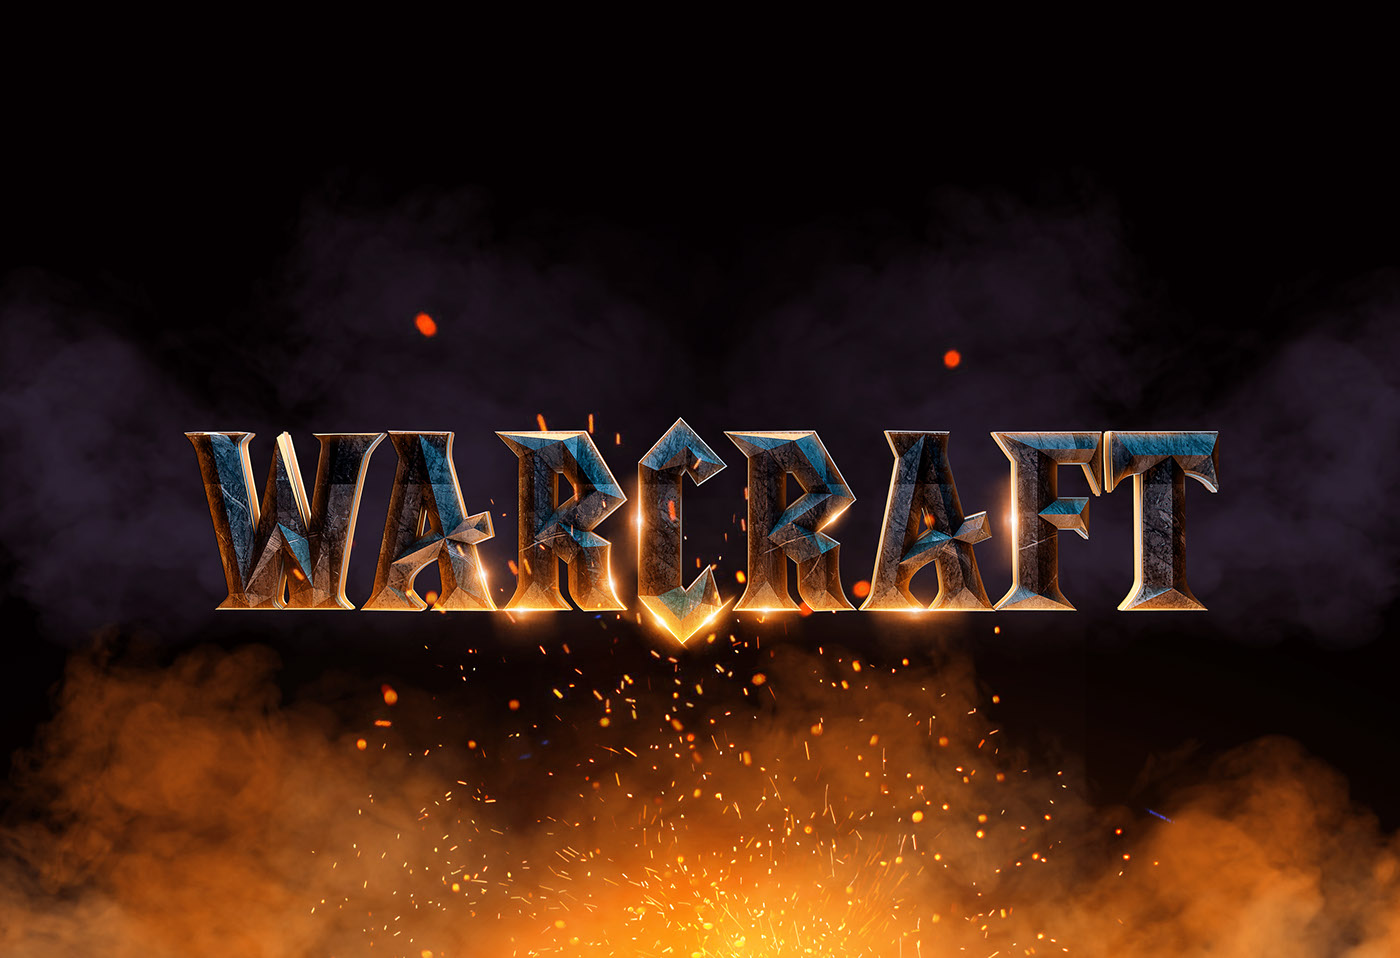 photoshop cinema 4d type 3D warcraft game retouch fire